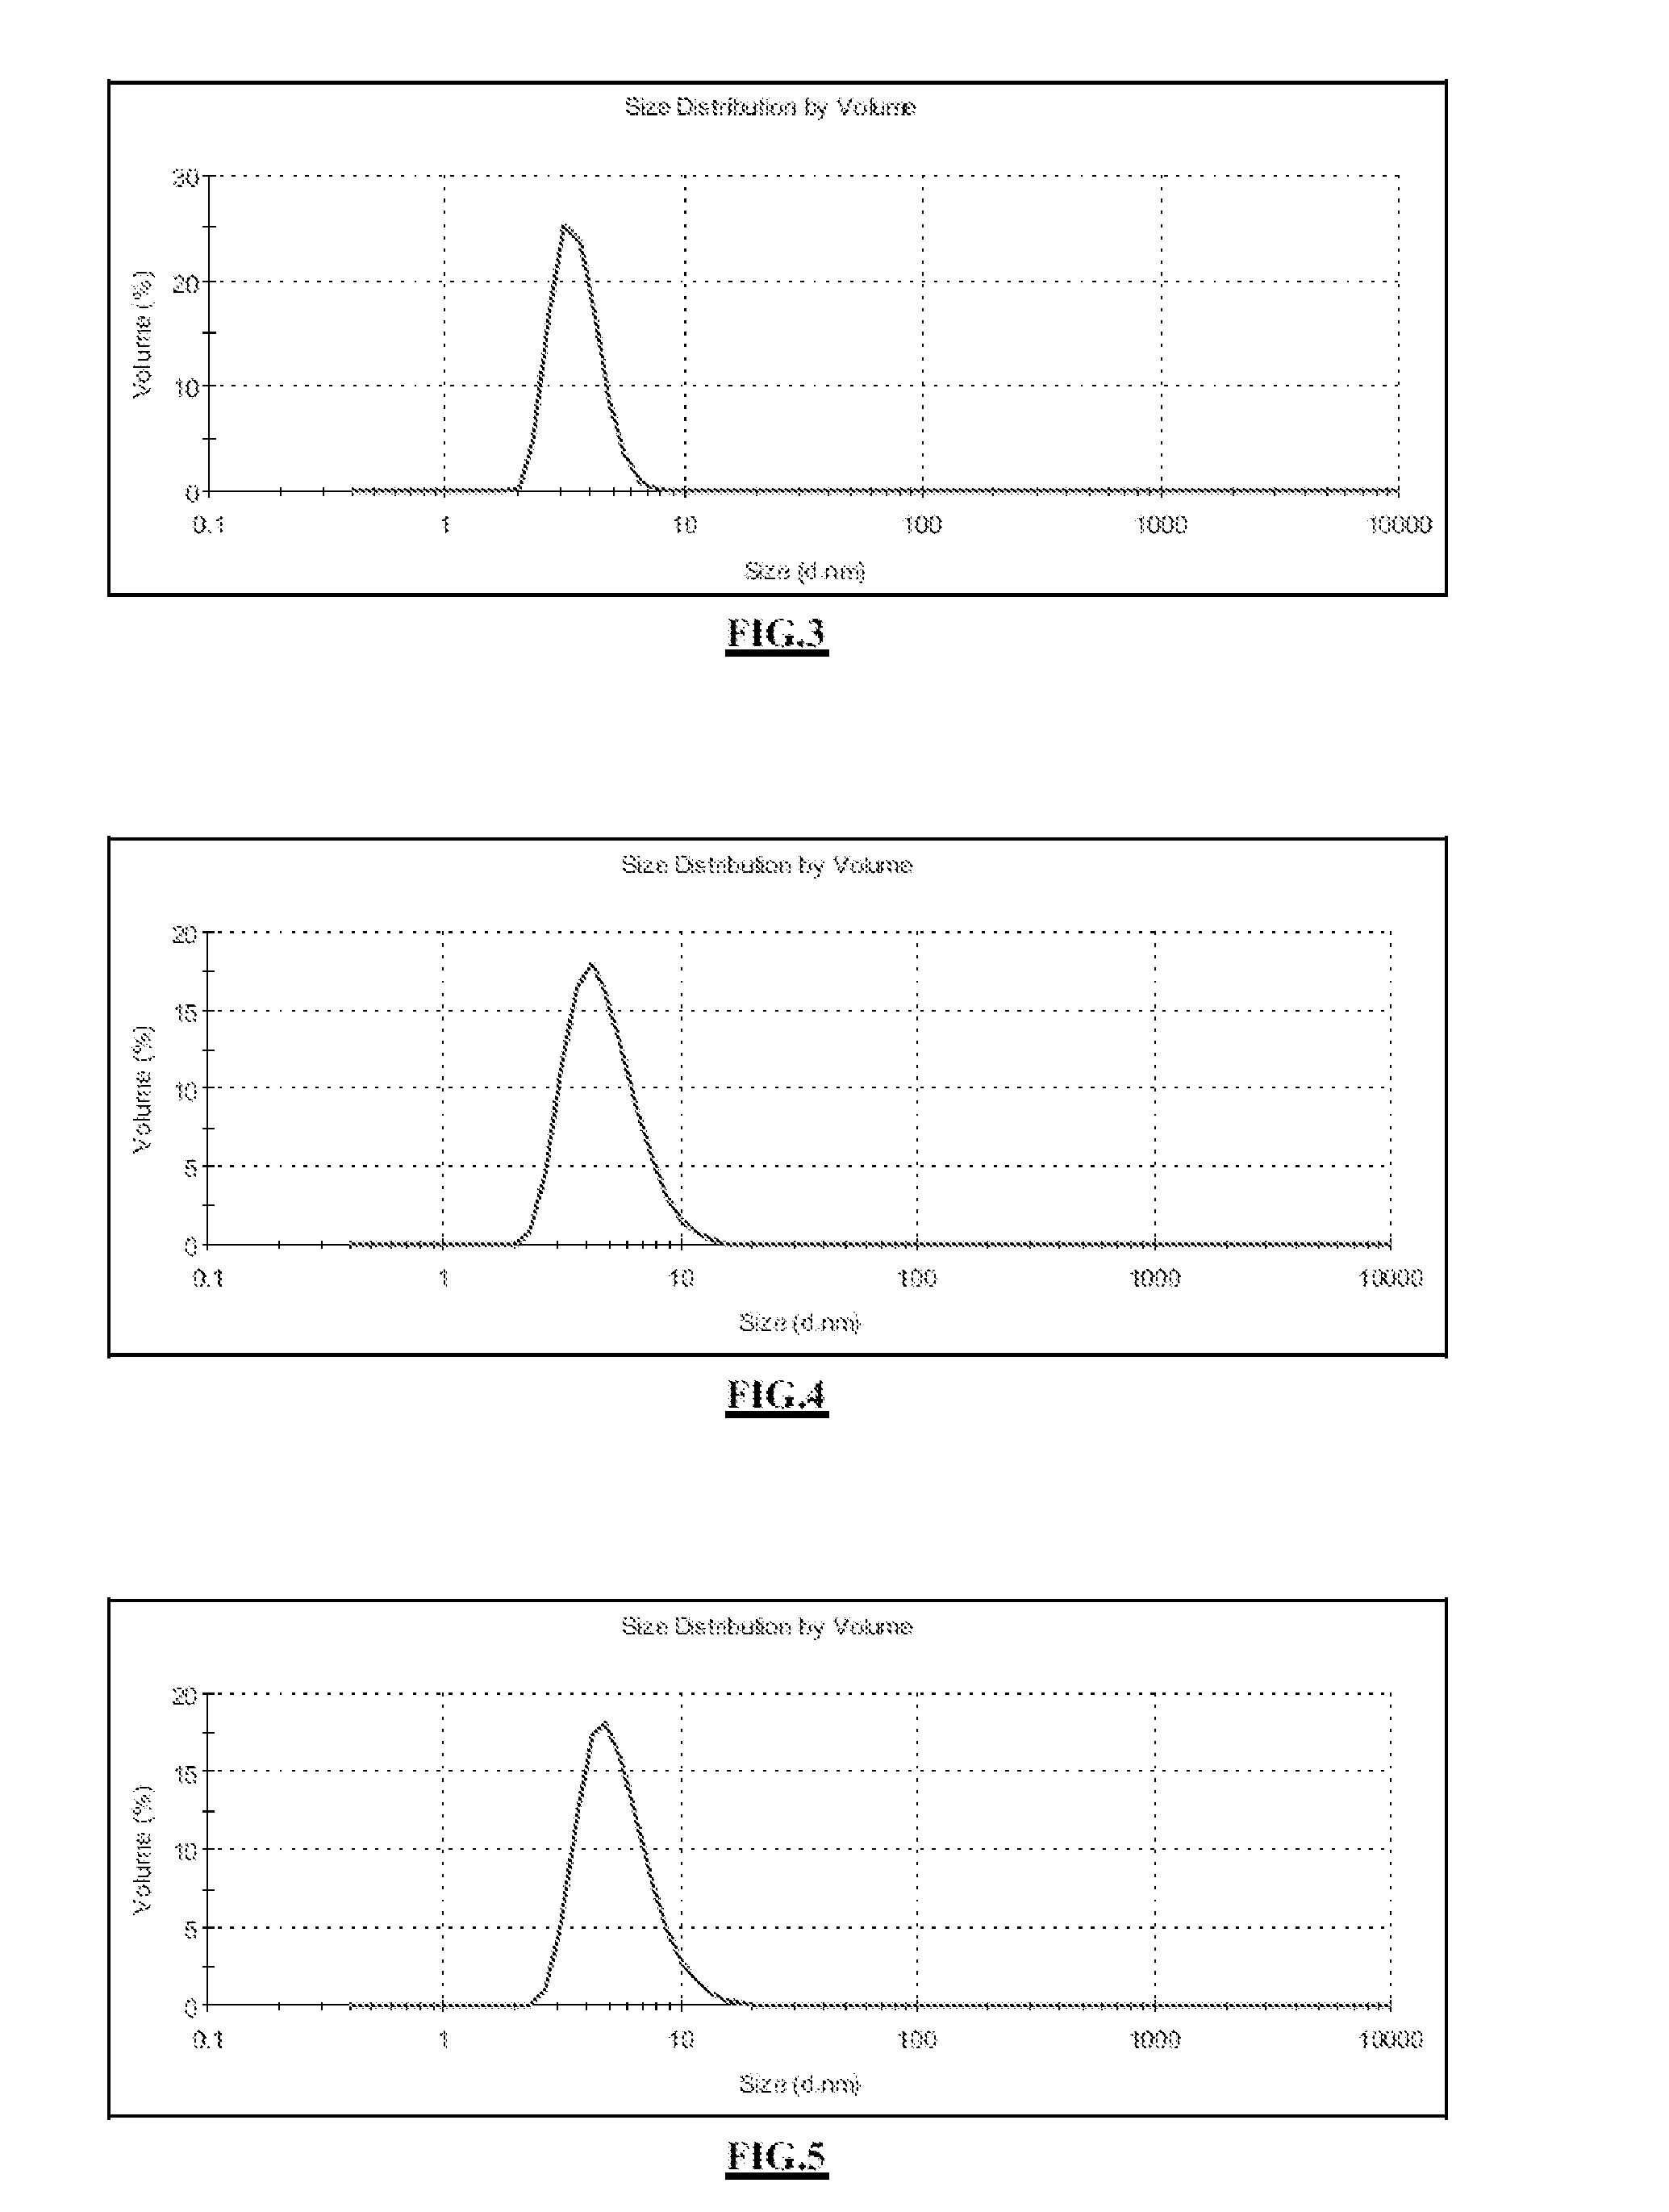 Ultrafine nanoparticles comprising a functionalized polyorganosiloxane matrix and including metal complexes; method for obtaining same and uses thereof in medical imaging and/or therapy